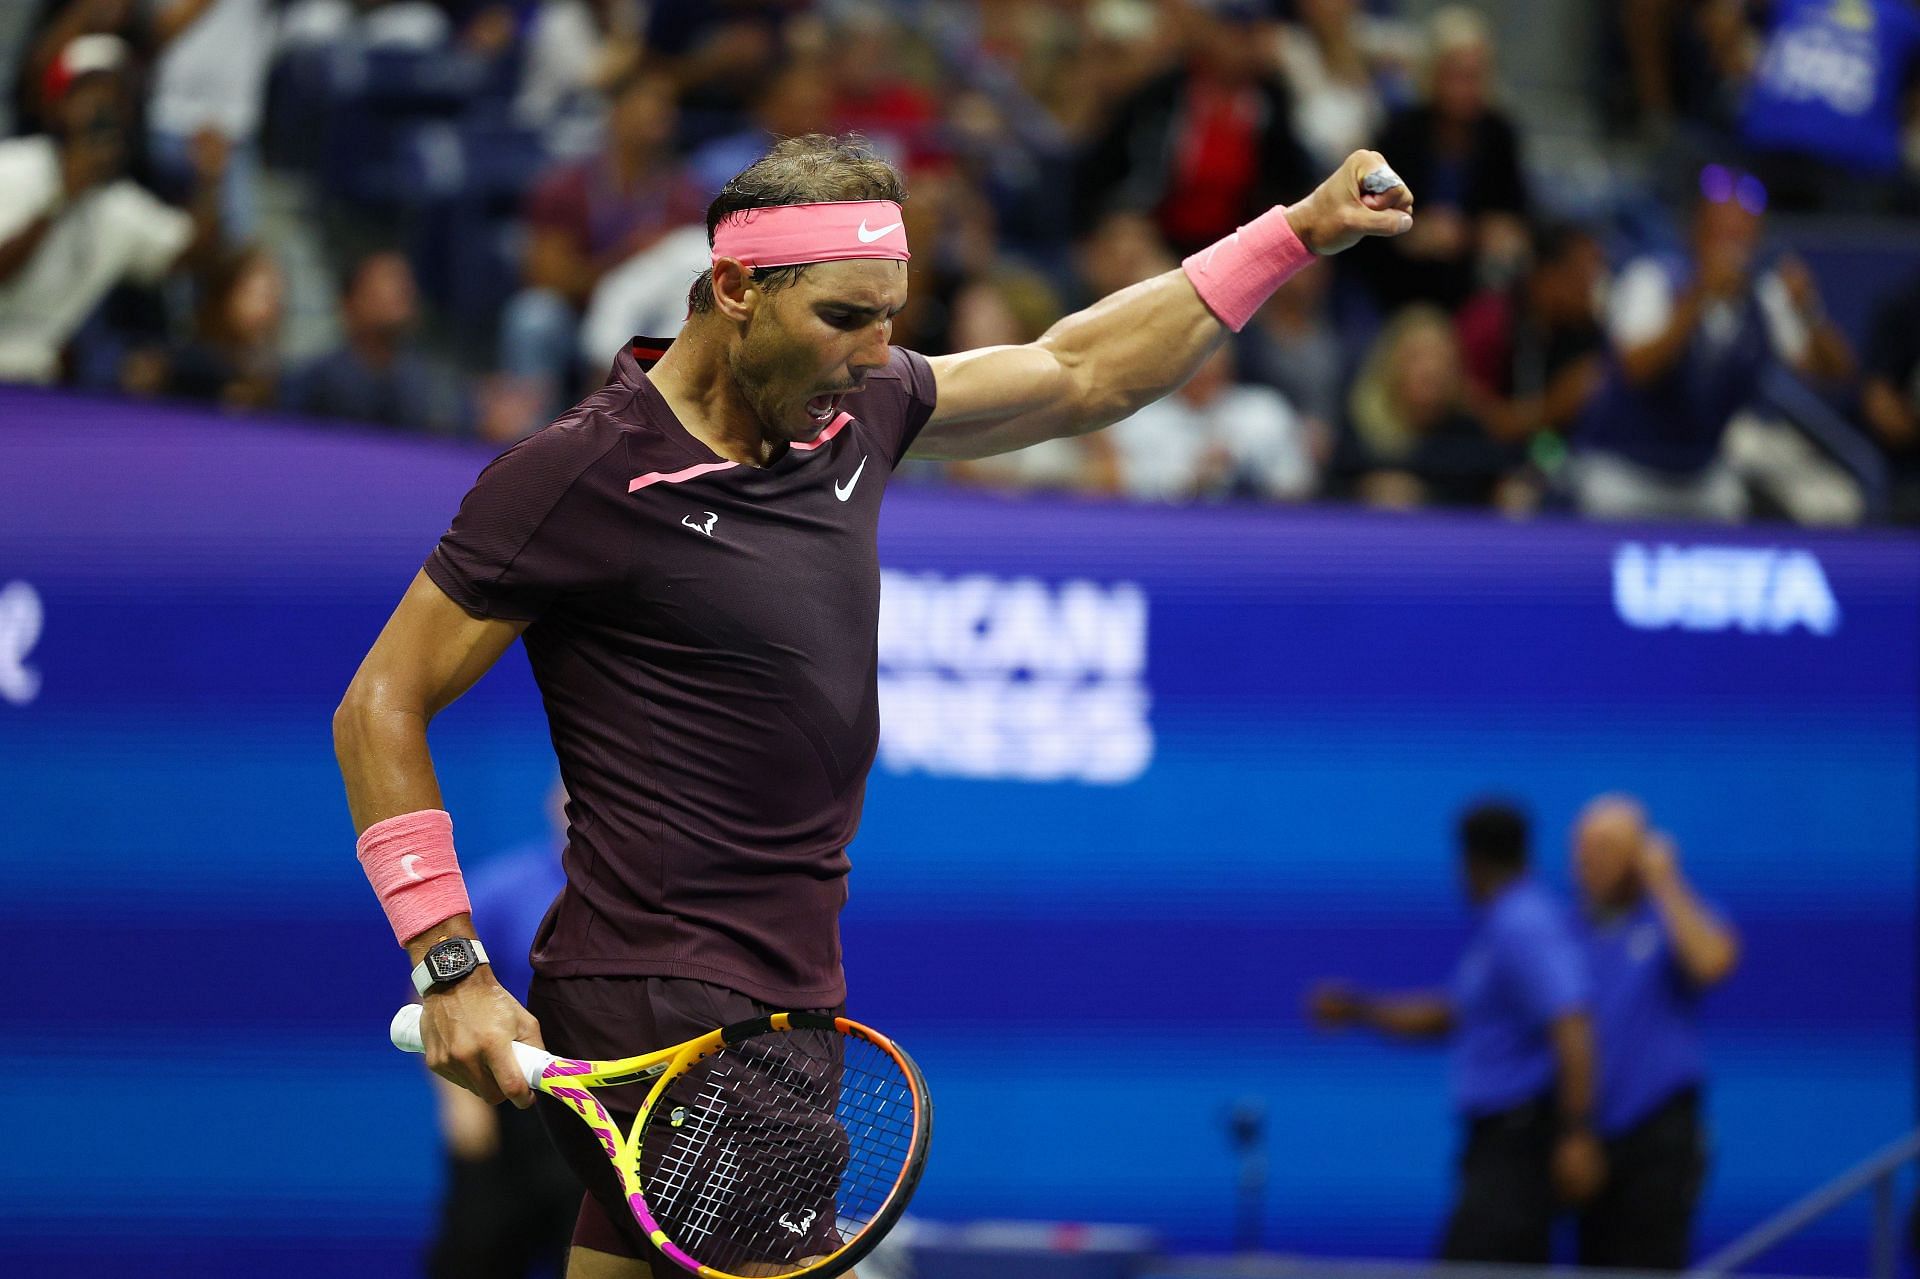 Rafael Nadal takes on Frances Tiafoe in the fourth round of the US Open